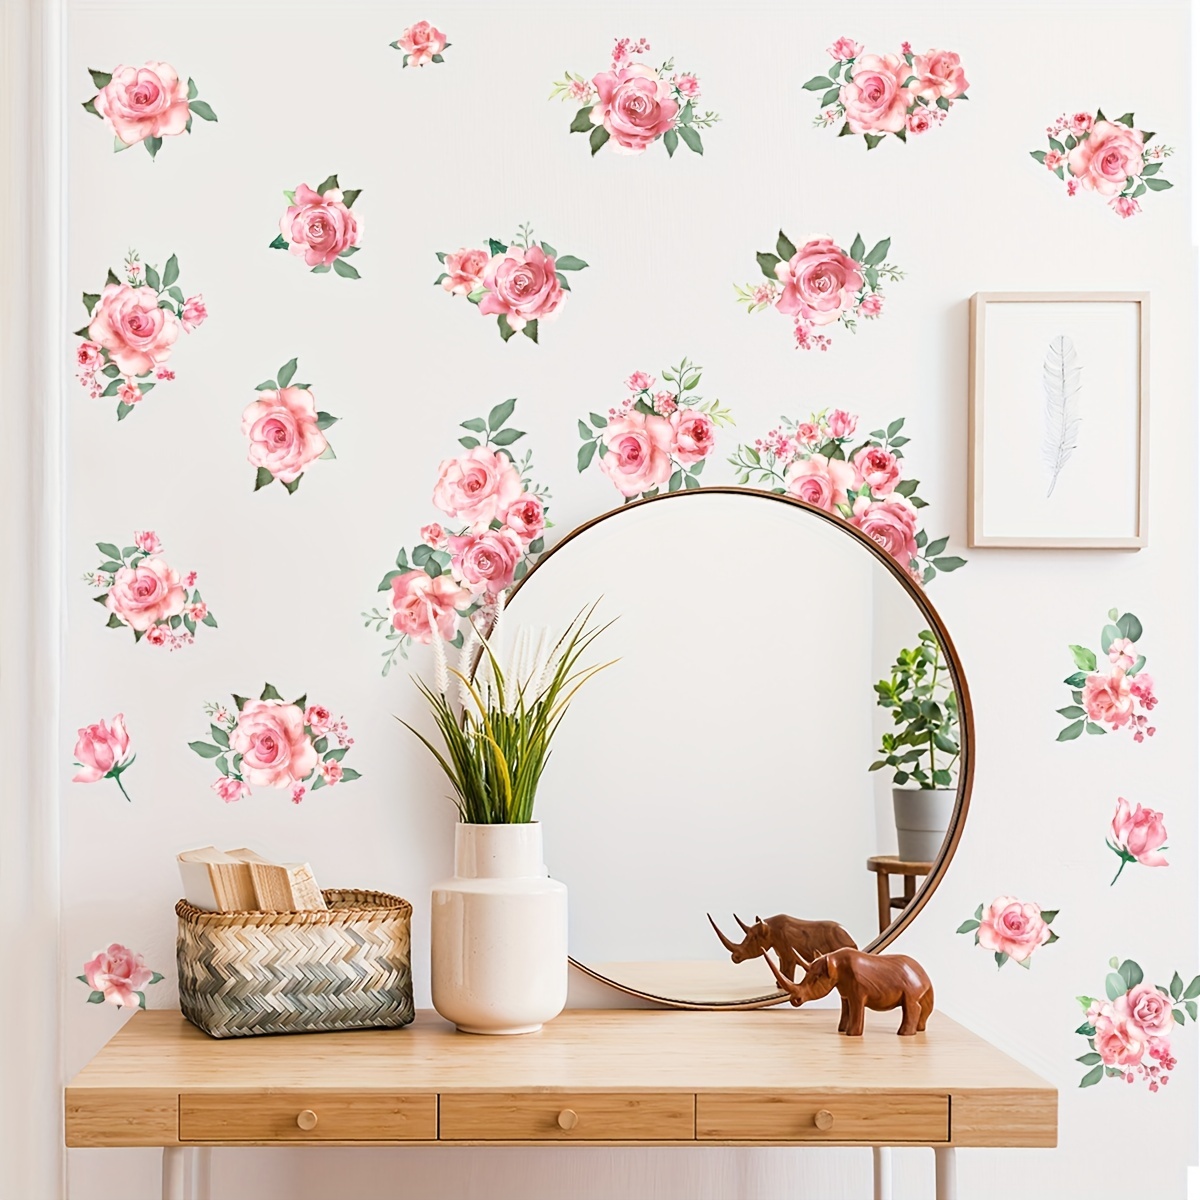 

Set Of 6 Creative Wall Sticker, Flower Pattern Self-adhesive Wall Stickers, Bedroom Entryway Living Room Porch Home Decoration Wall Stickers, Removable Stickers, Wall Decor Decals